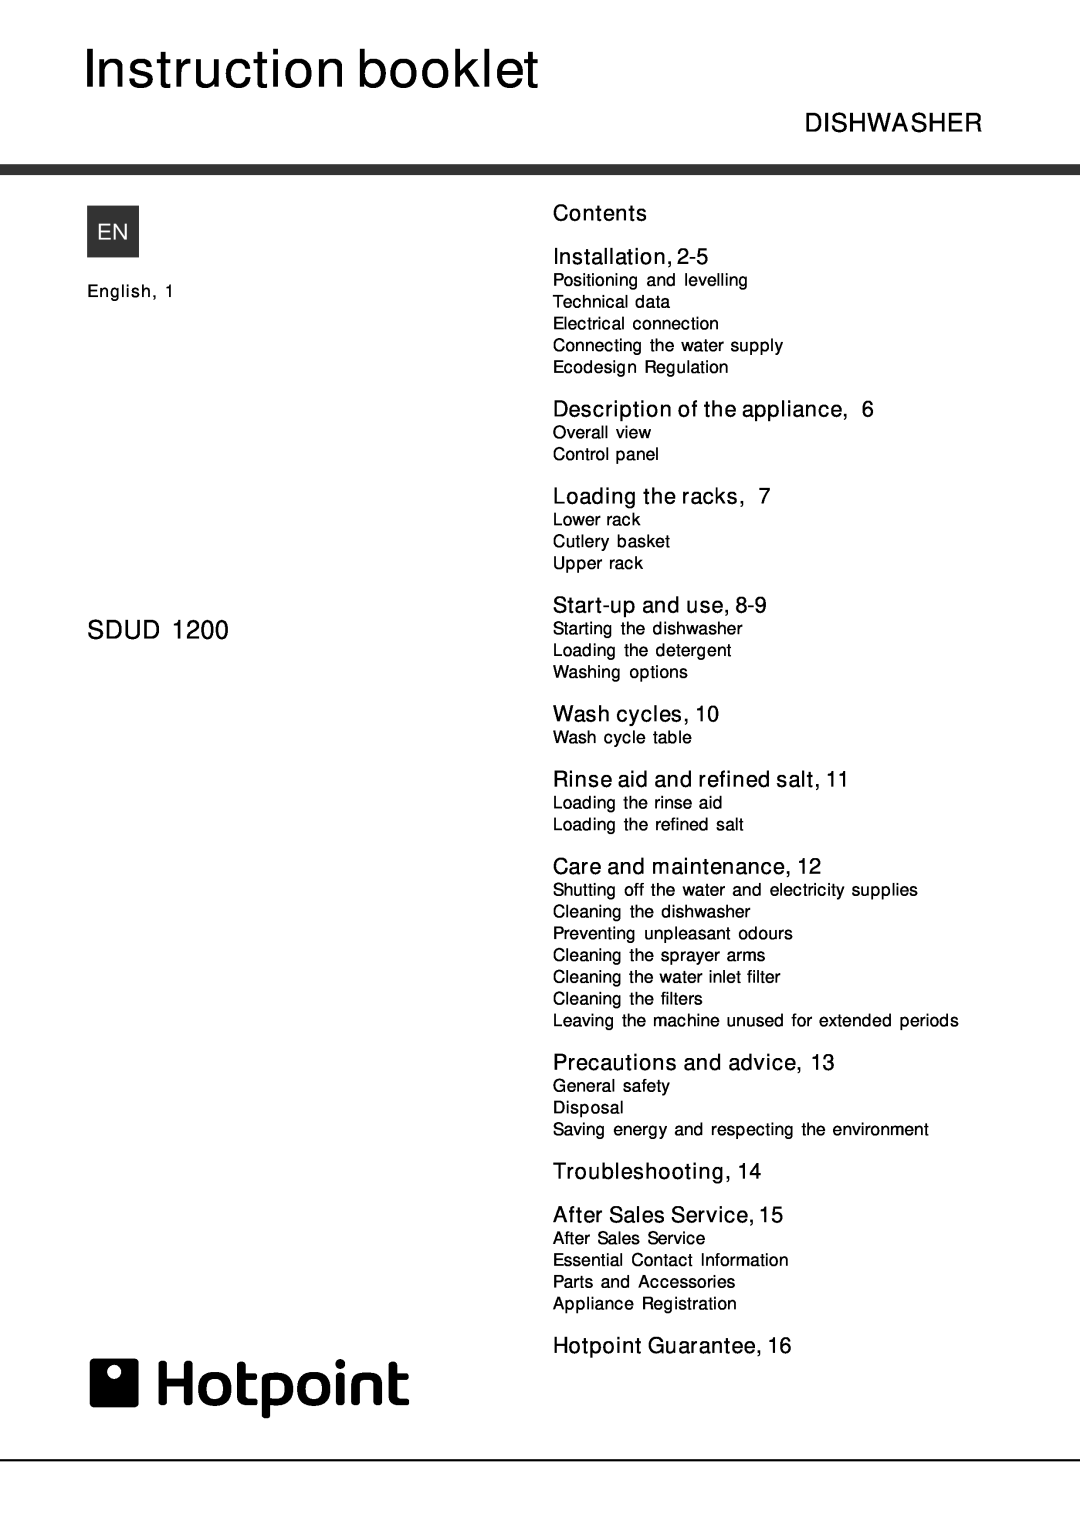 Hotpoint SDUD 1200 manual Instruction booklet, Contents, Installation, Description of the appliance, Loading the racks 